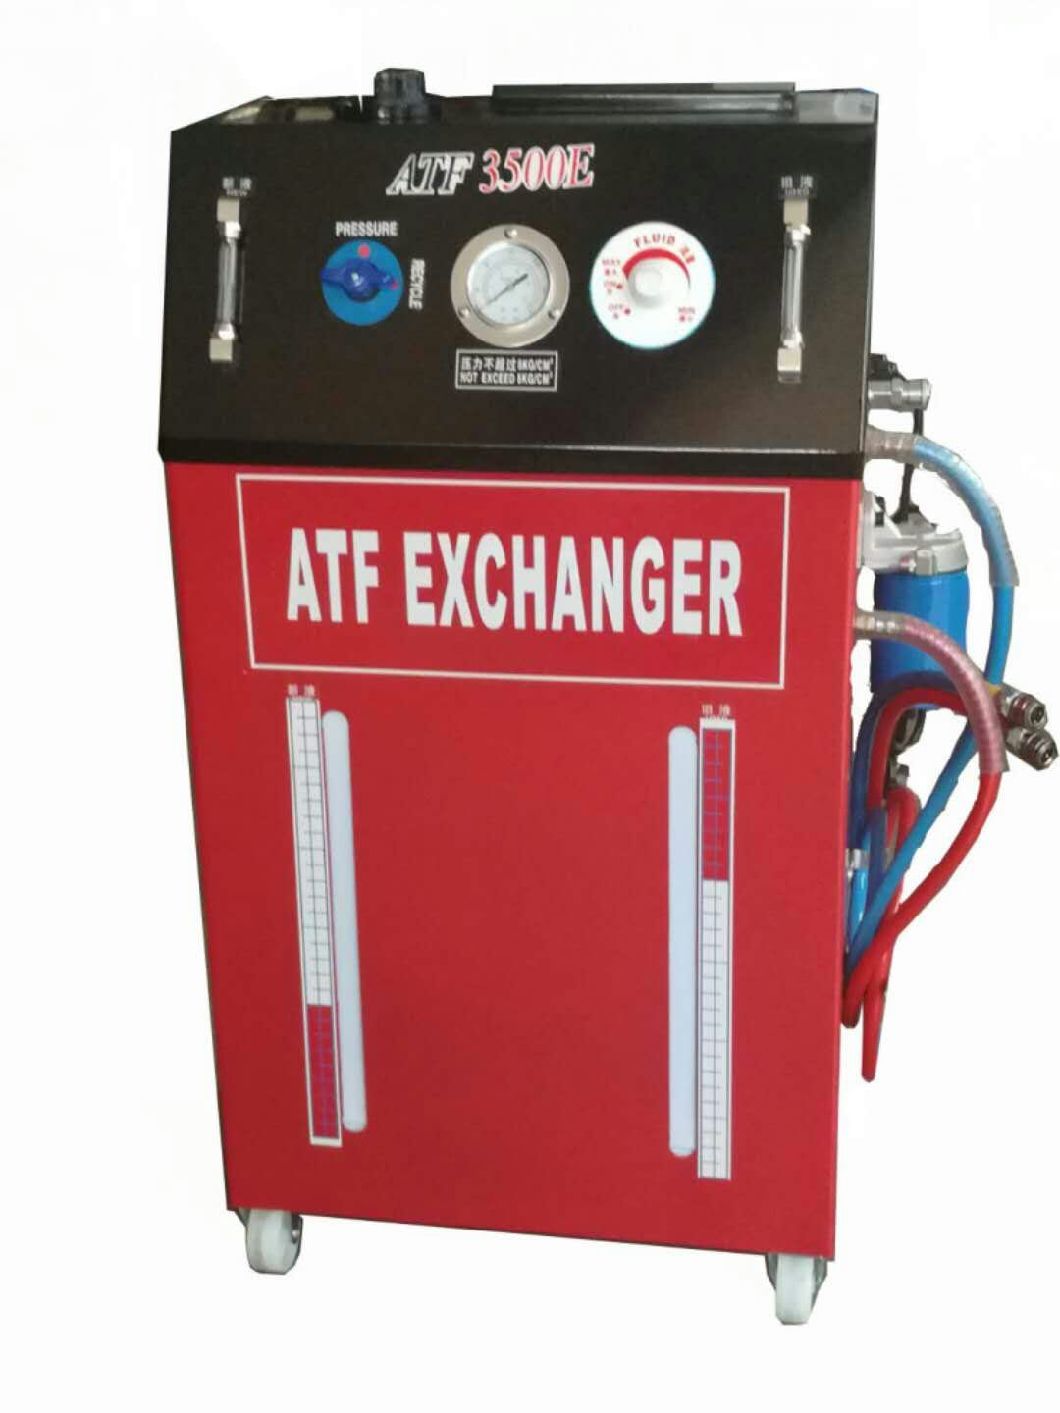 Best Price Auto-Transmission Fluid Oil Exchanger Atf-3500e